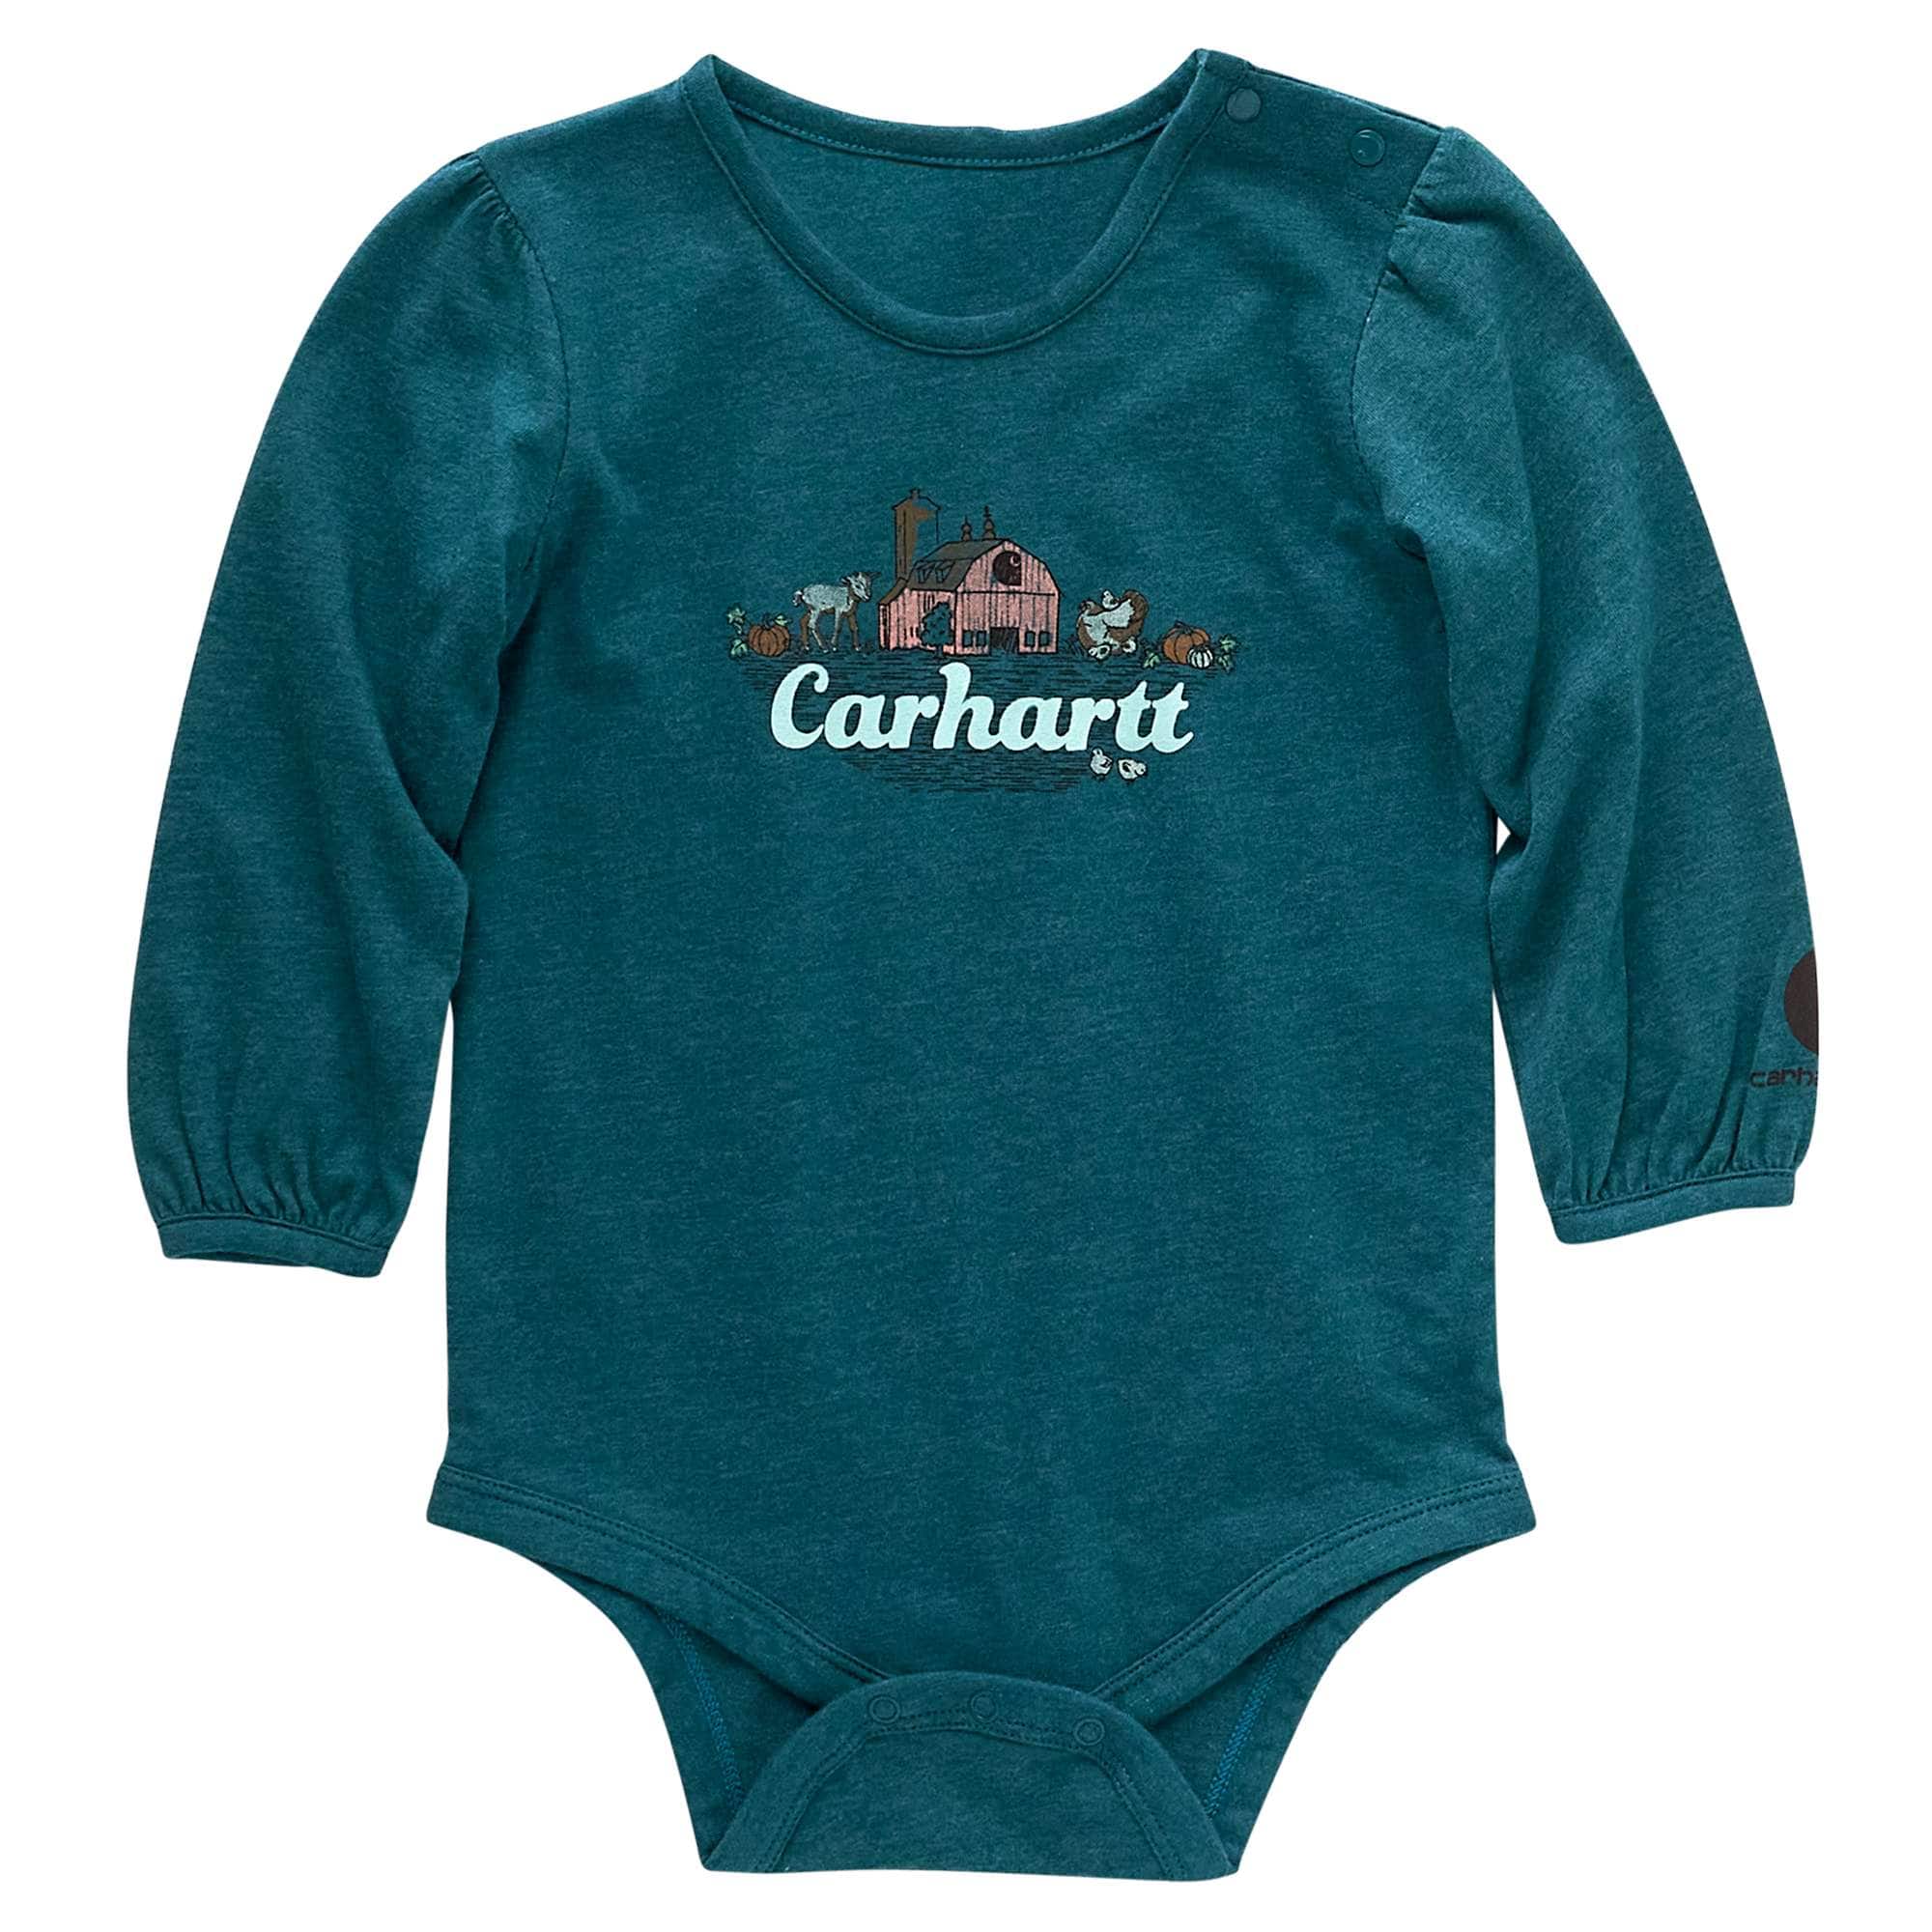 Carhartt Long-Sleeve Coveralls 2-Pair Set for Baby Girls